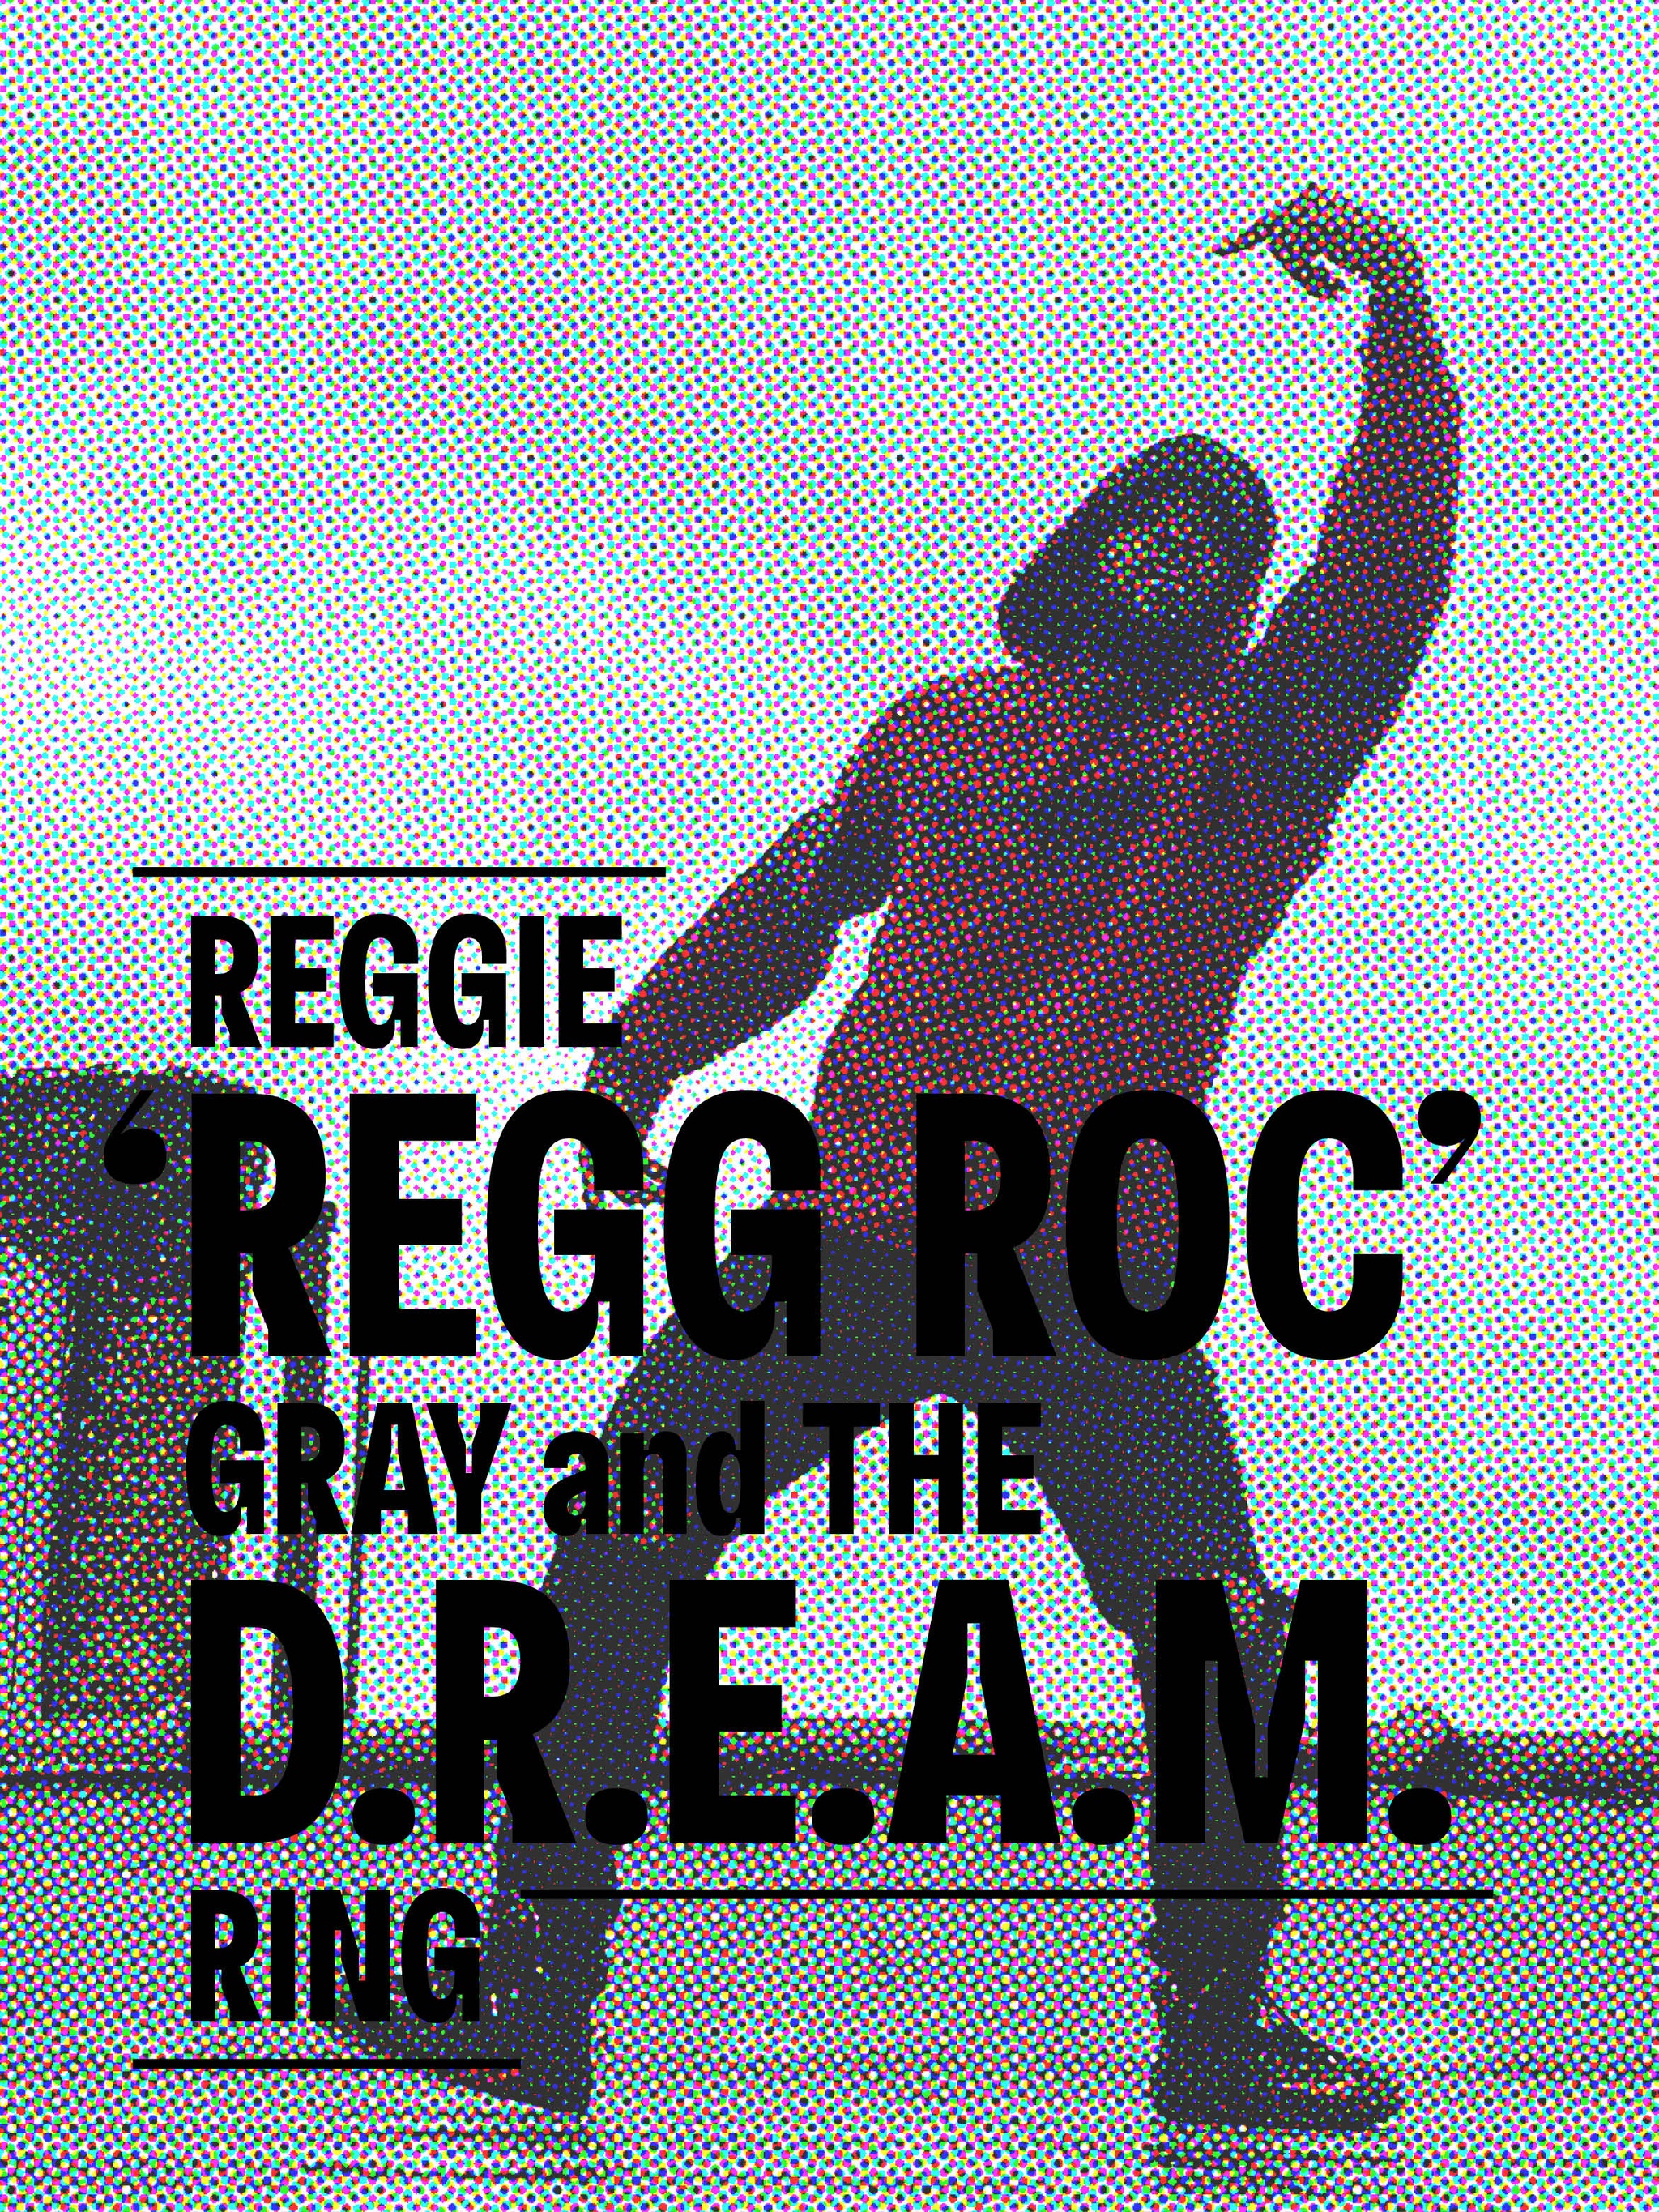 A dancer dancing on a rooftop with a cloudy sky behind and the overlaid text Reggie 'Regg Roc' Gray and the DREAM Ring